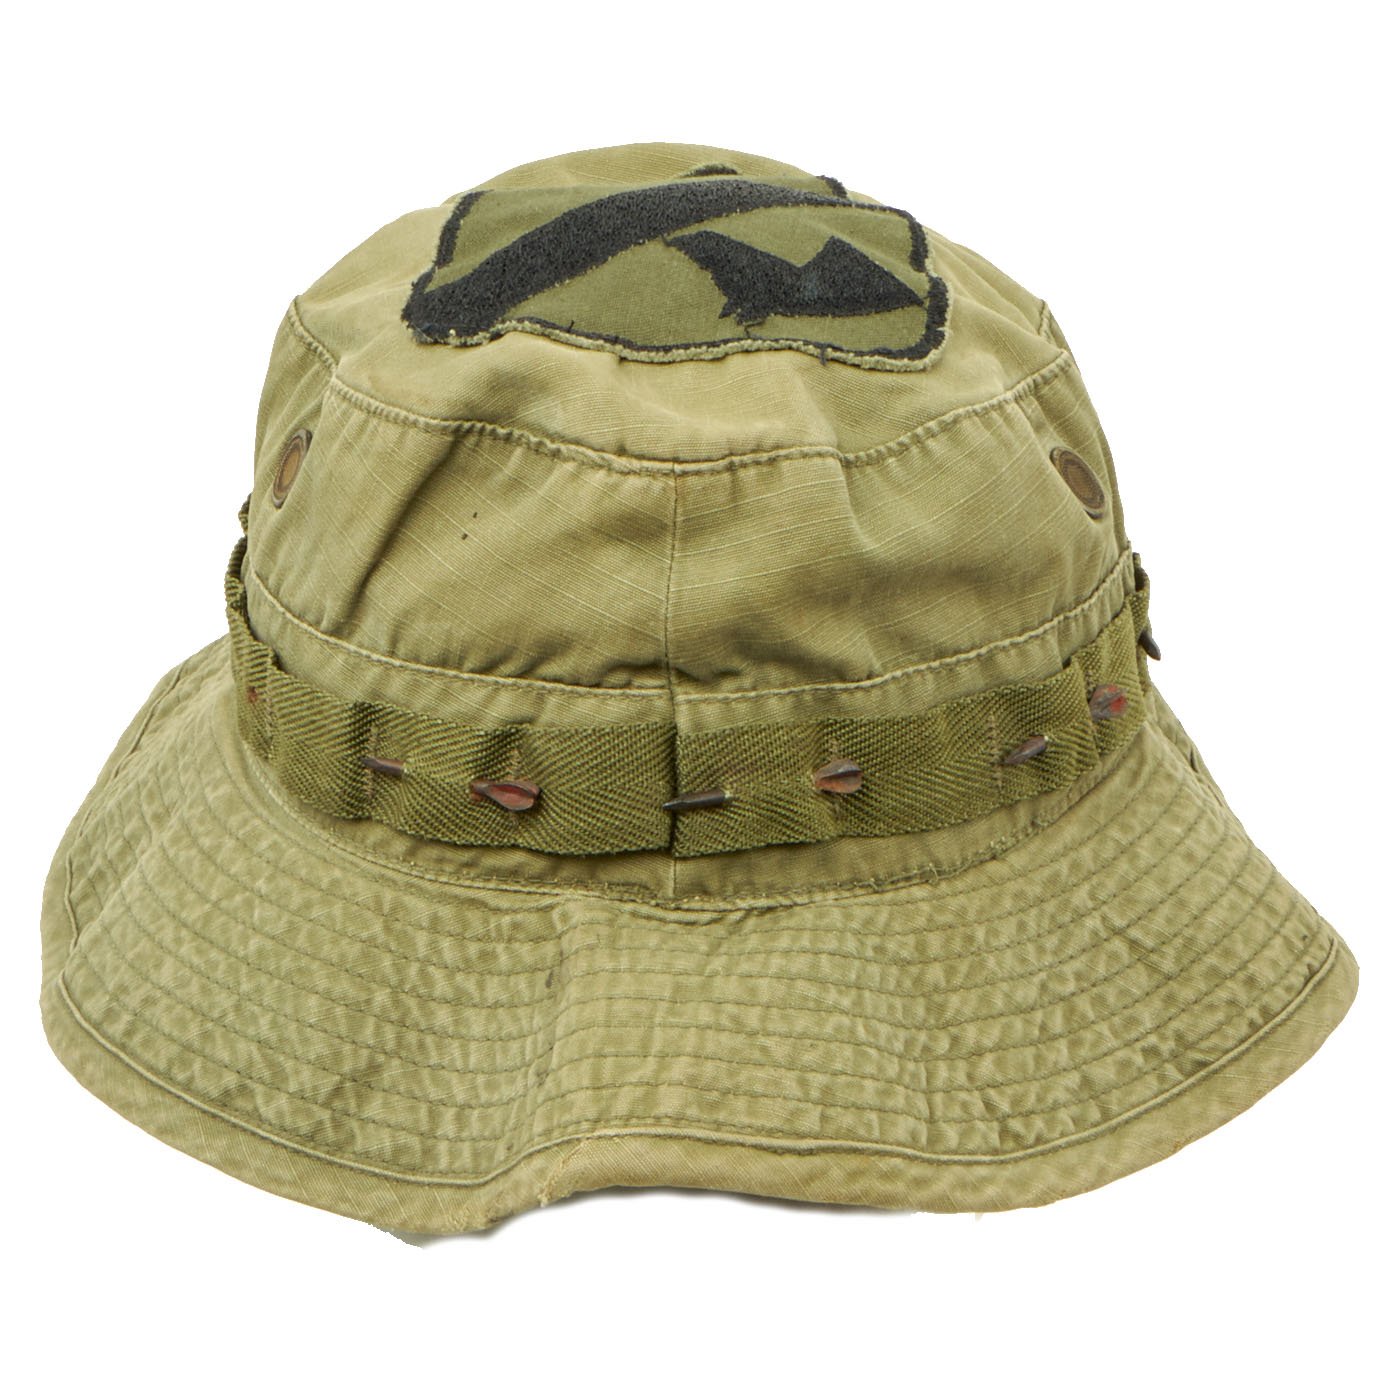 Original Military Issue Boonie Bush Hat 50/50 Nylon Cotton Made in USA -  SGT TROYS